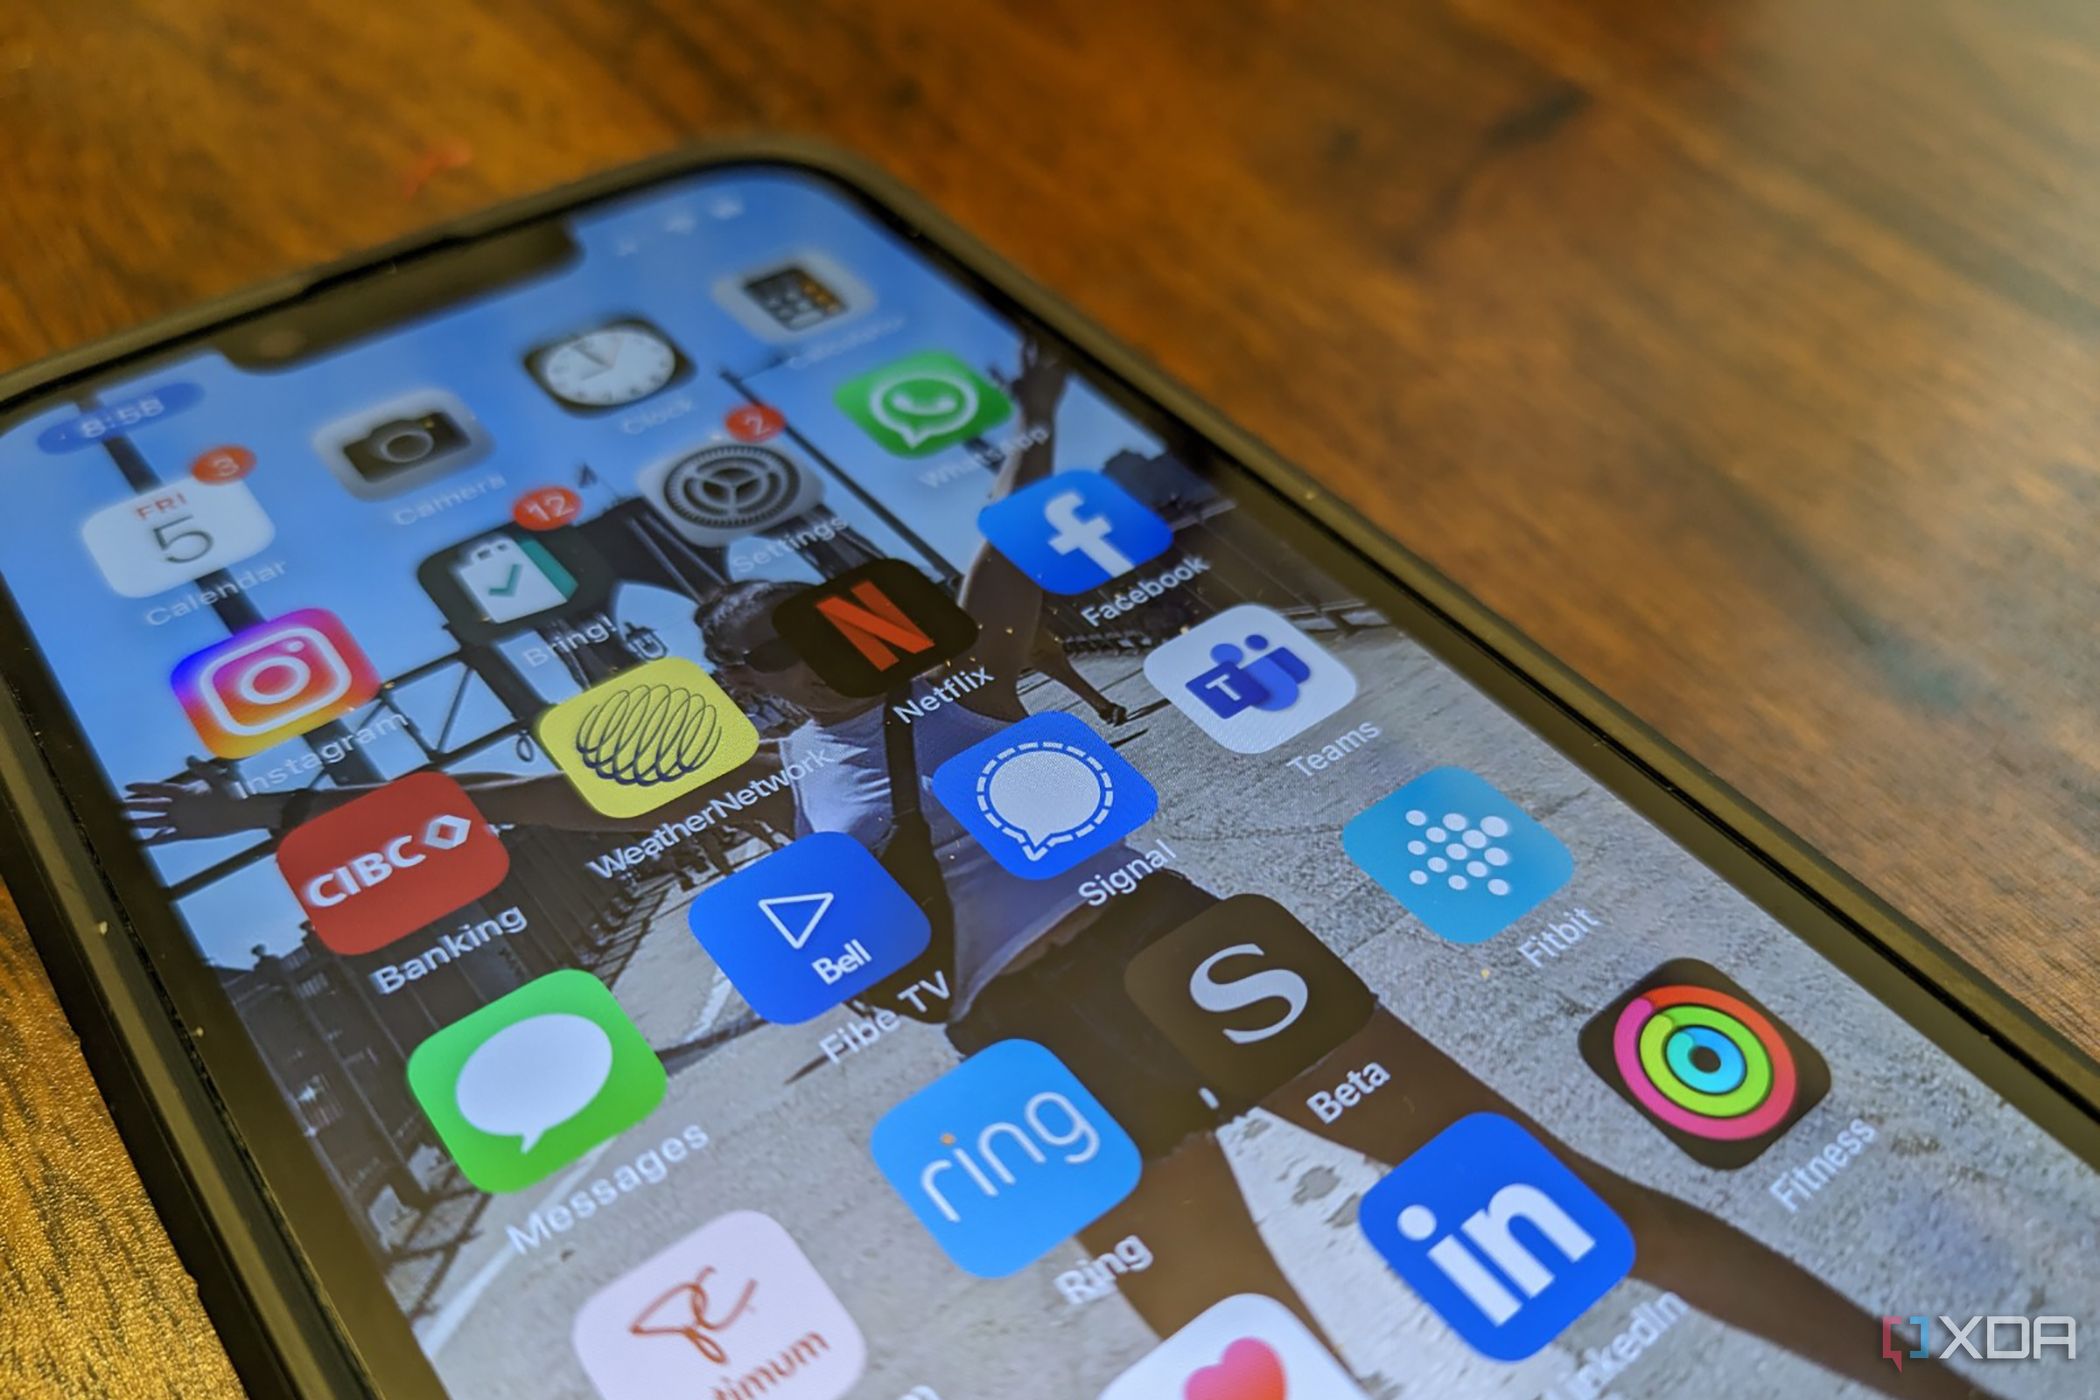 5 iPhone apps that have changed my life